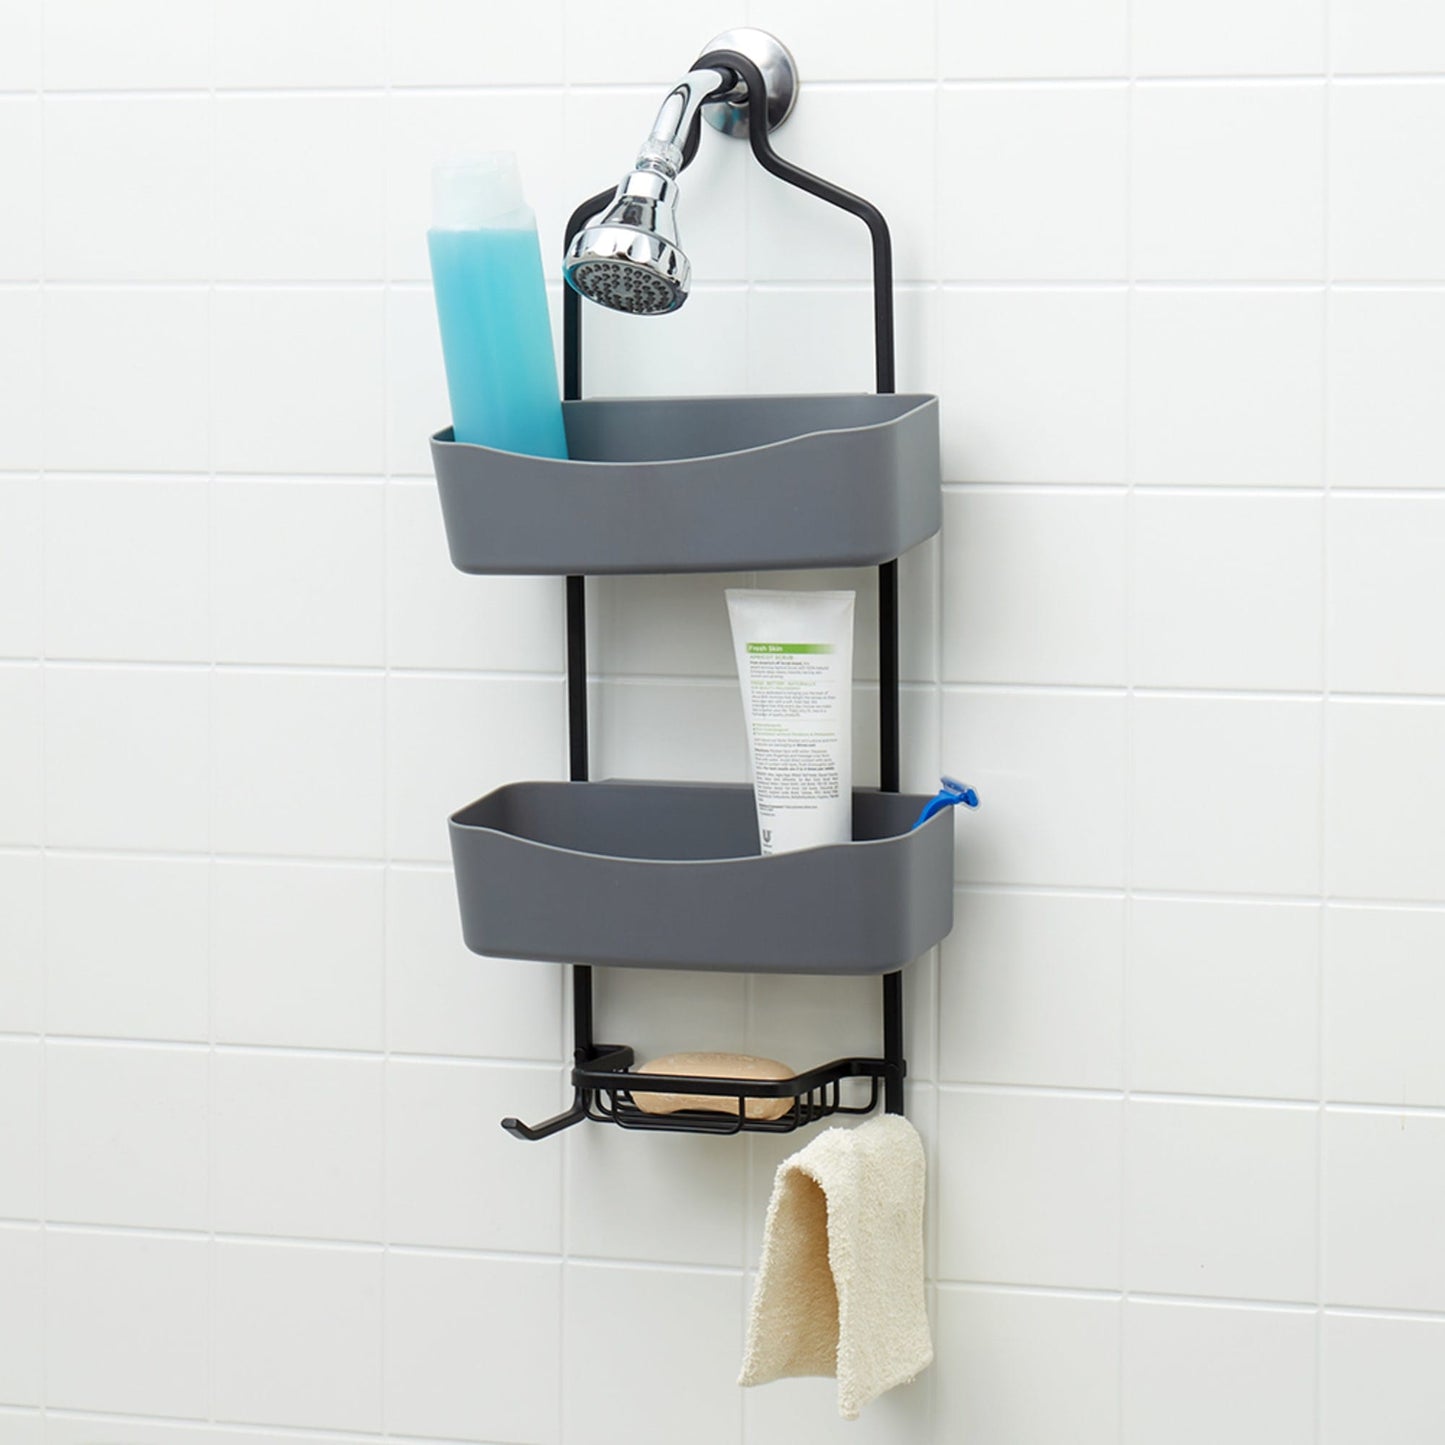 2 Tier Shower Caddy with Plastic Shelves, Grey